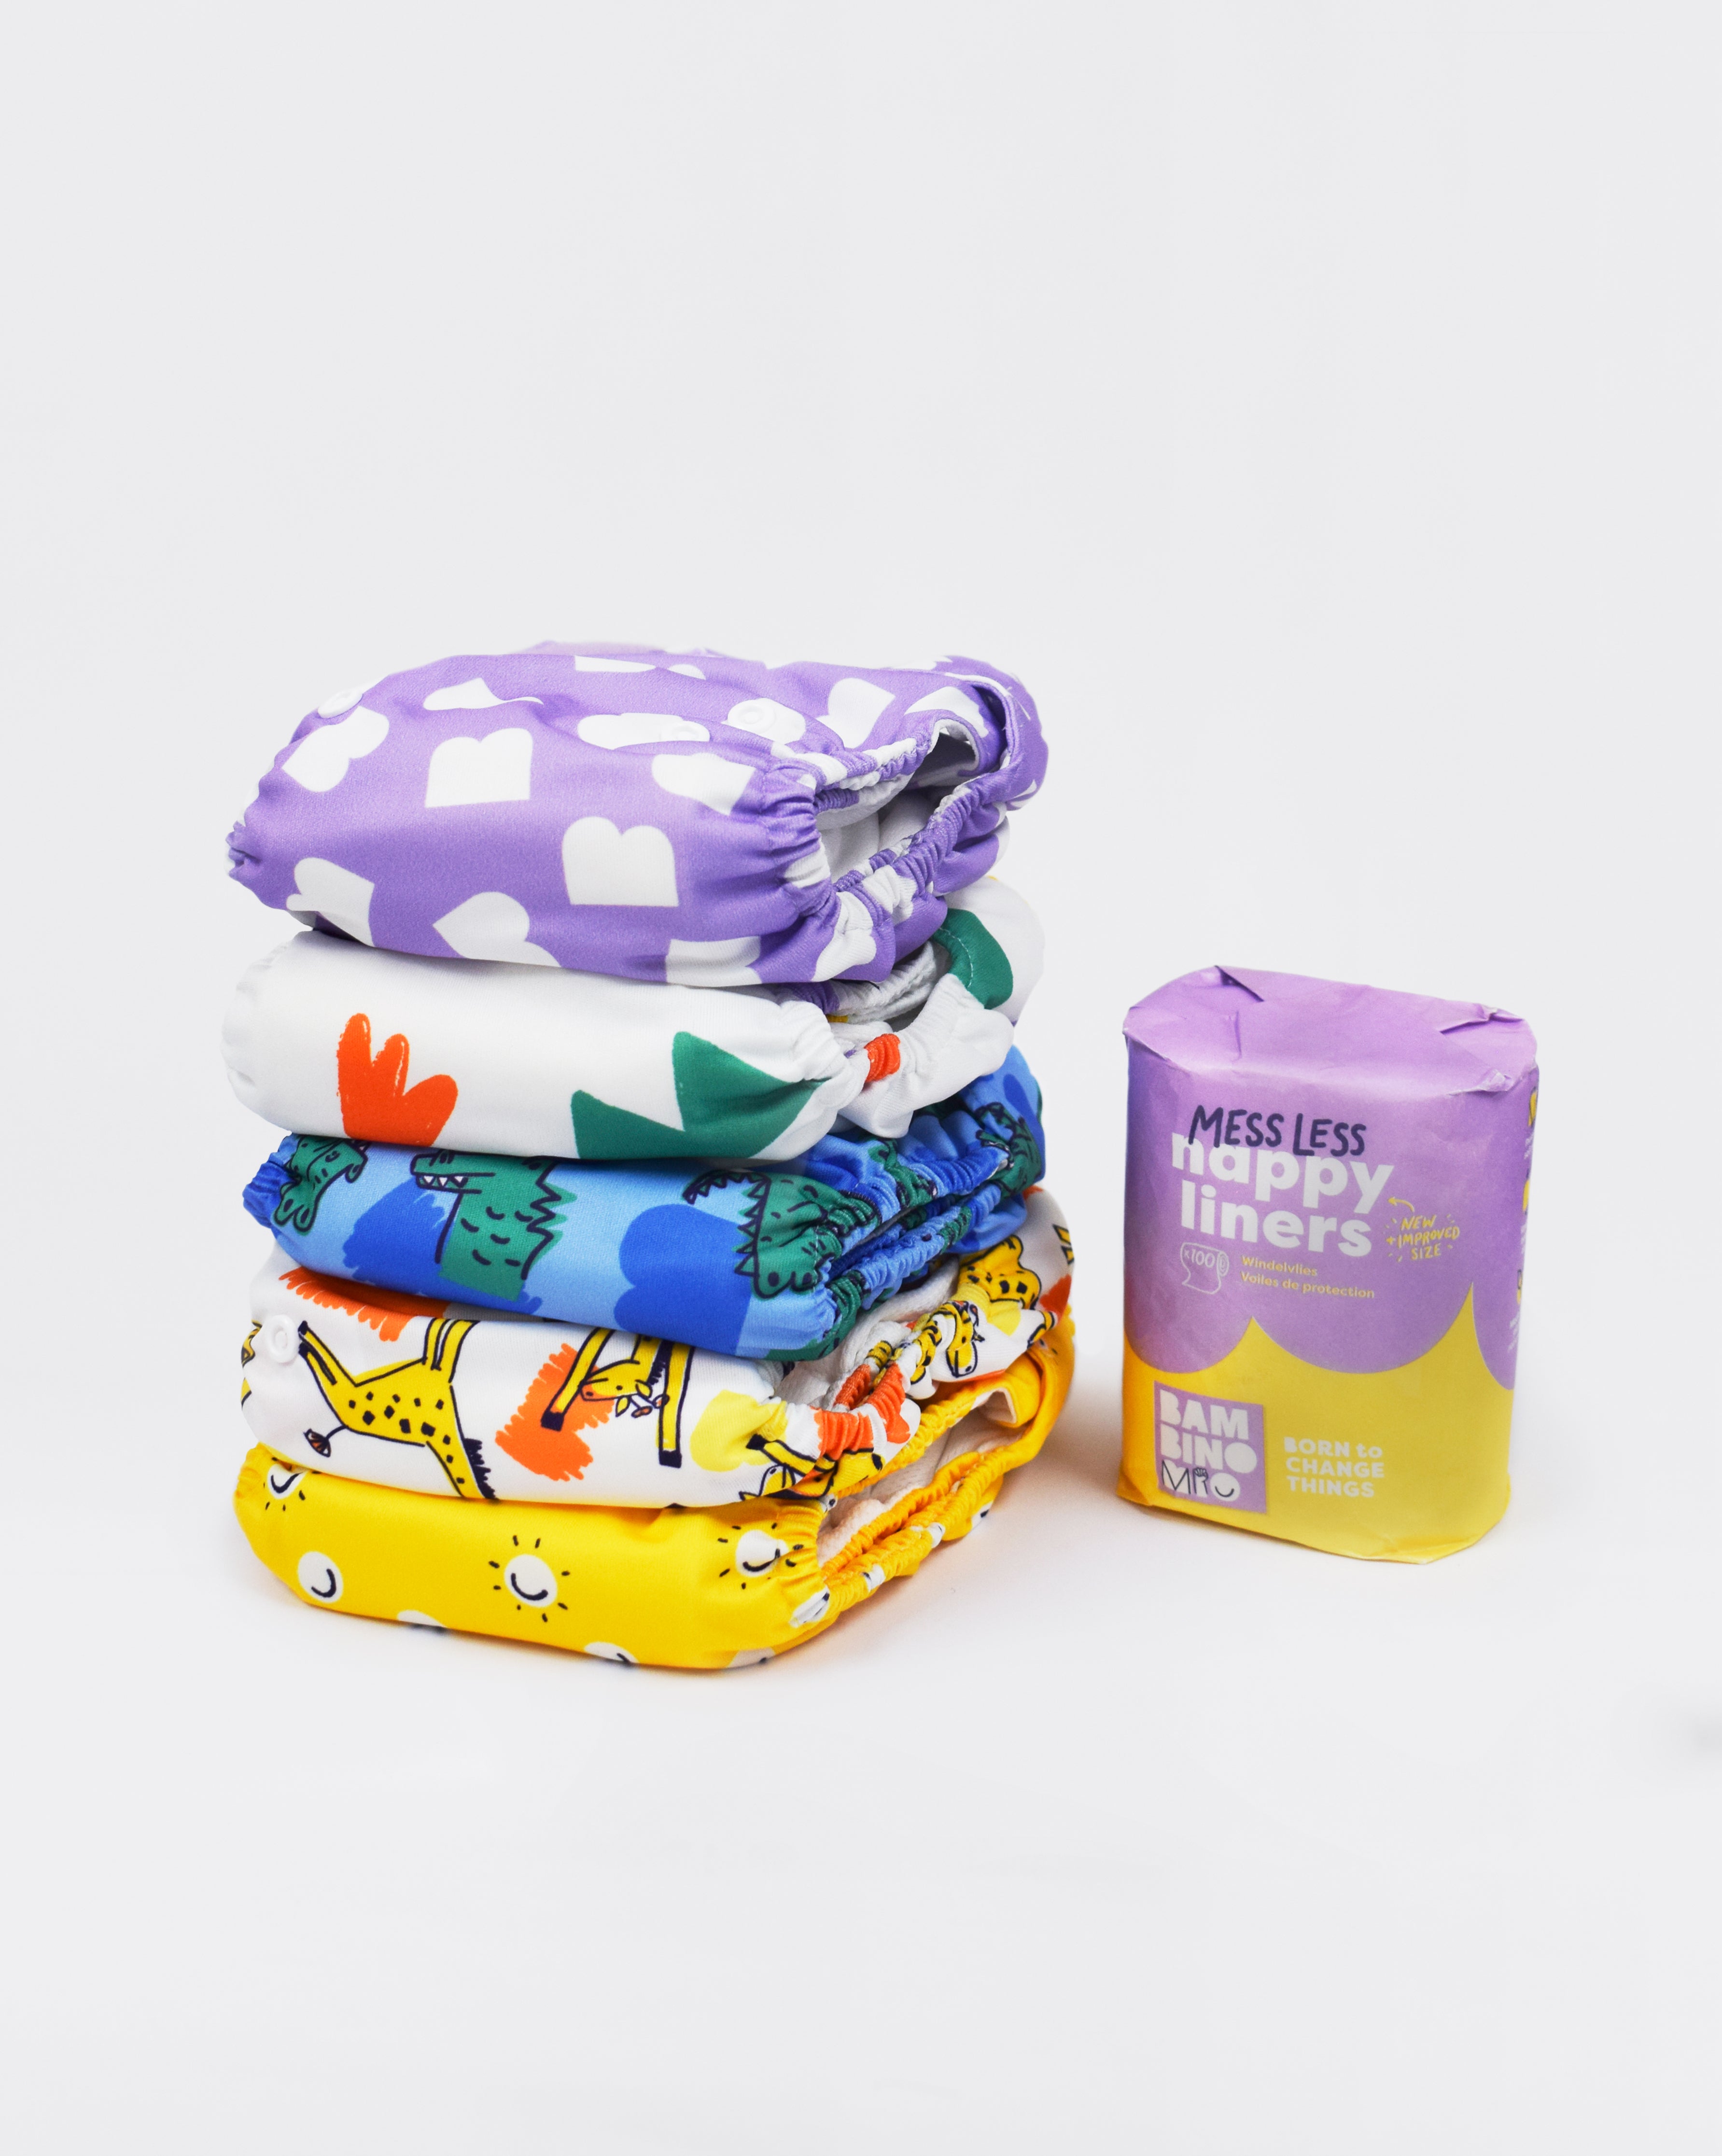 the Give-it-a-go bundle - Bambino Mio (UK & IE)